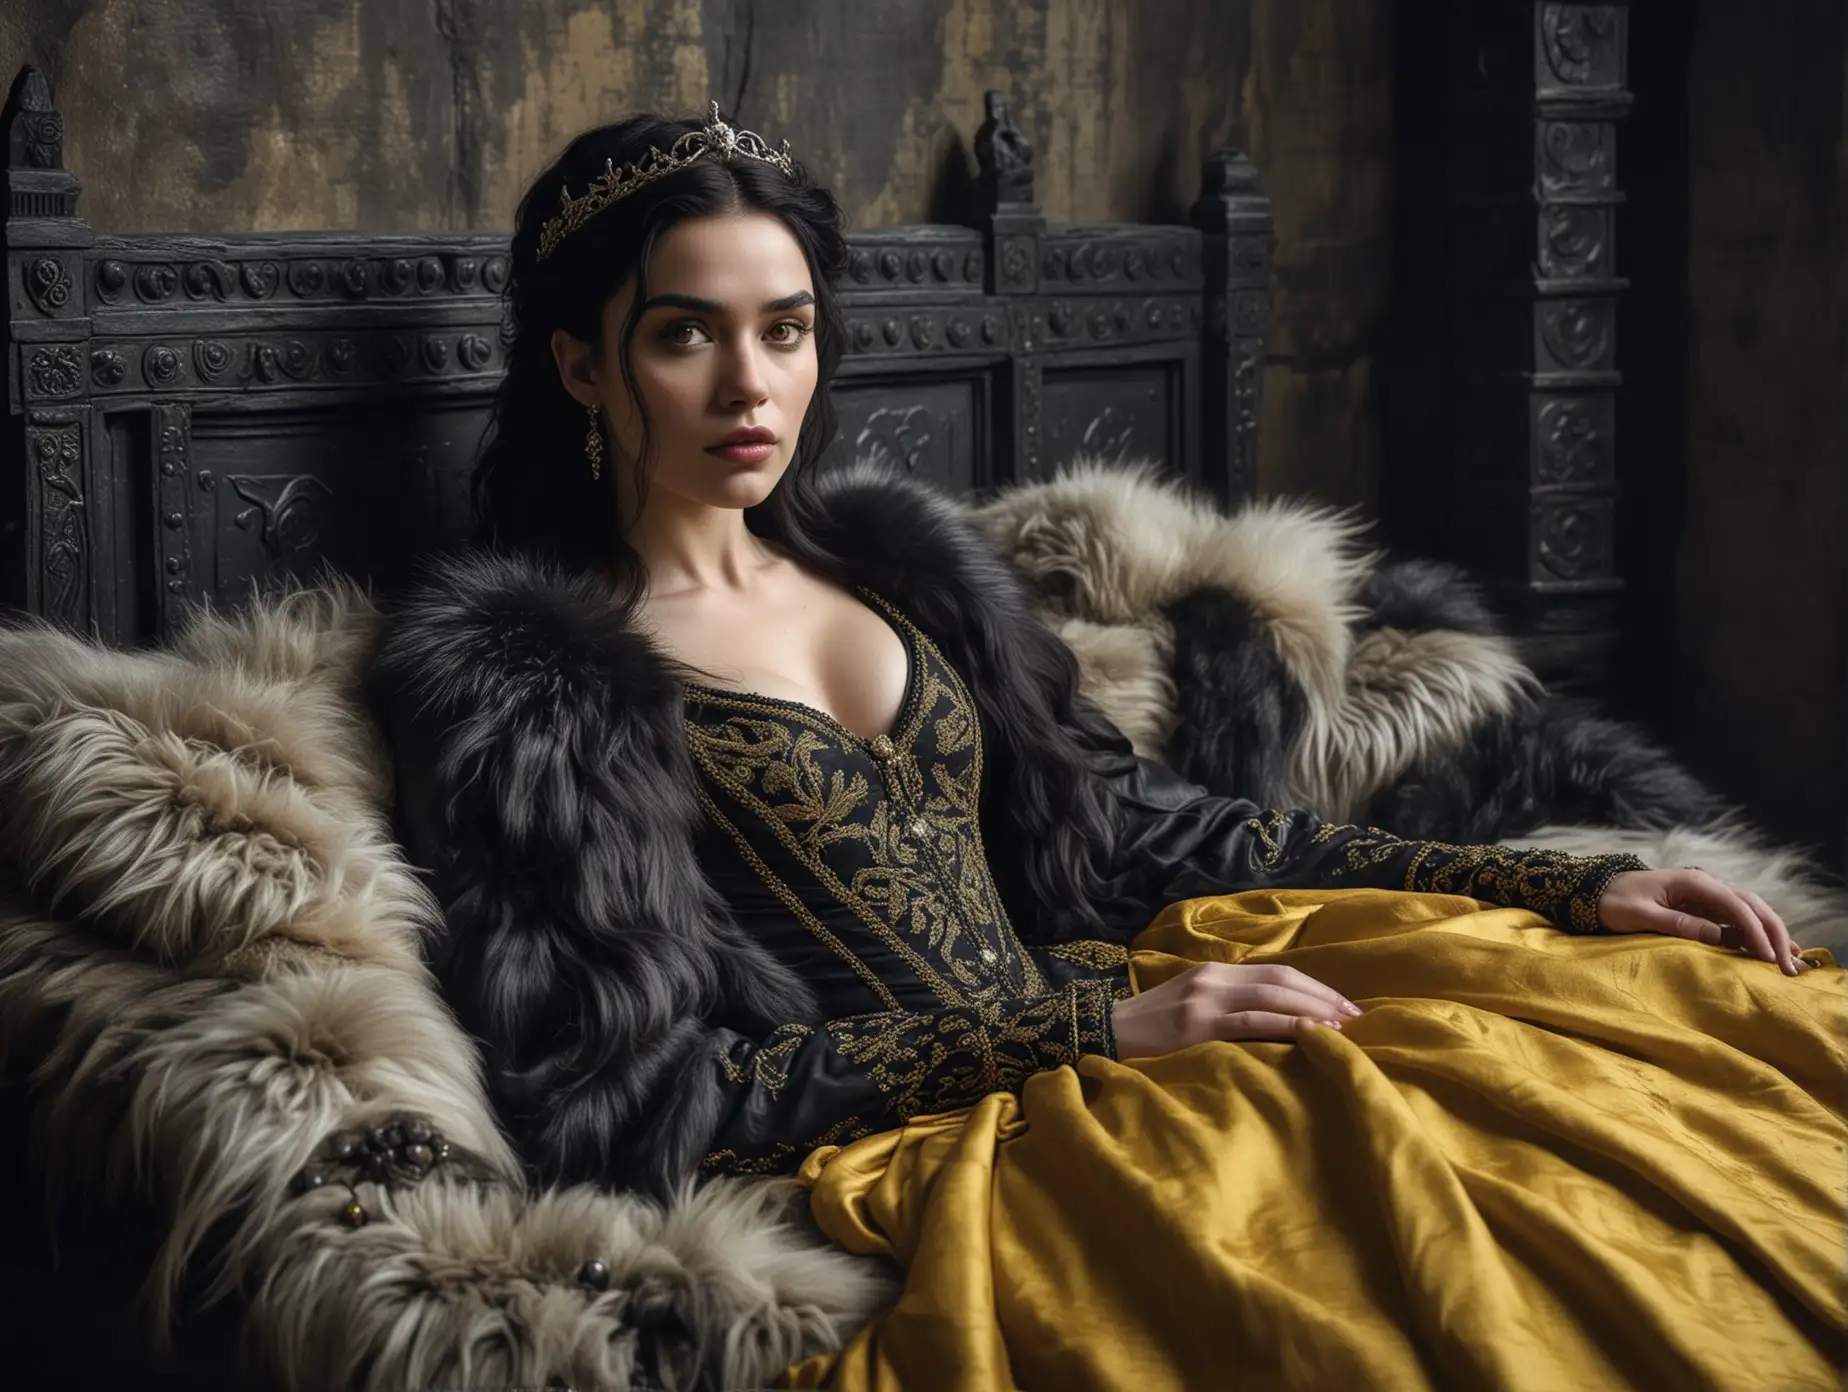 Dark Medieval Chamber Young Woman in Black and Yellow Gown on Furcovered Day Bed